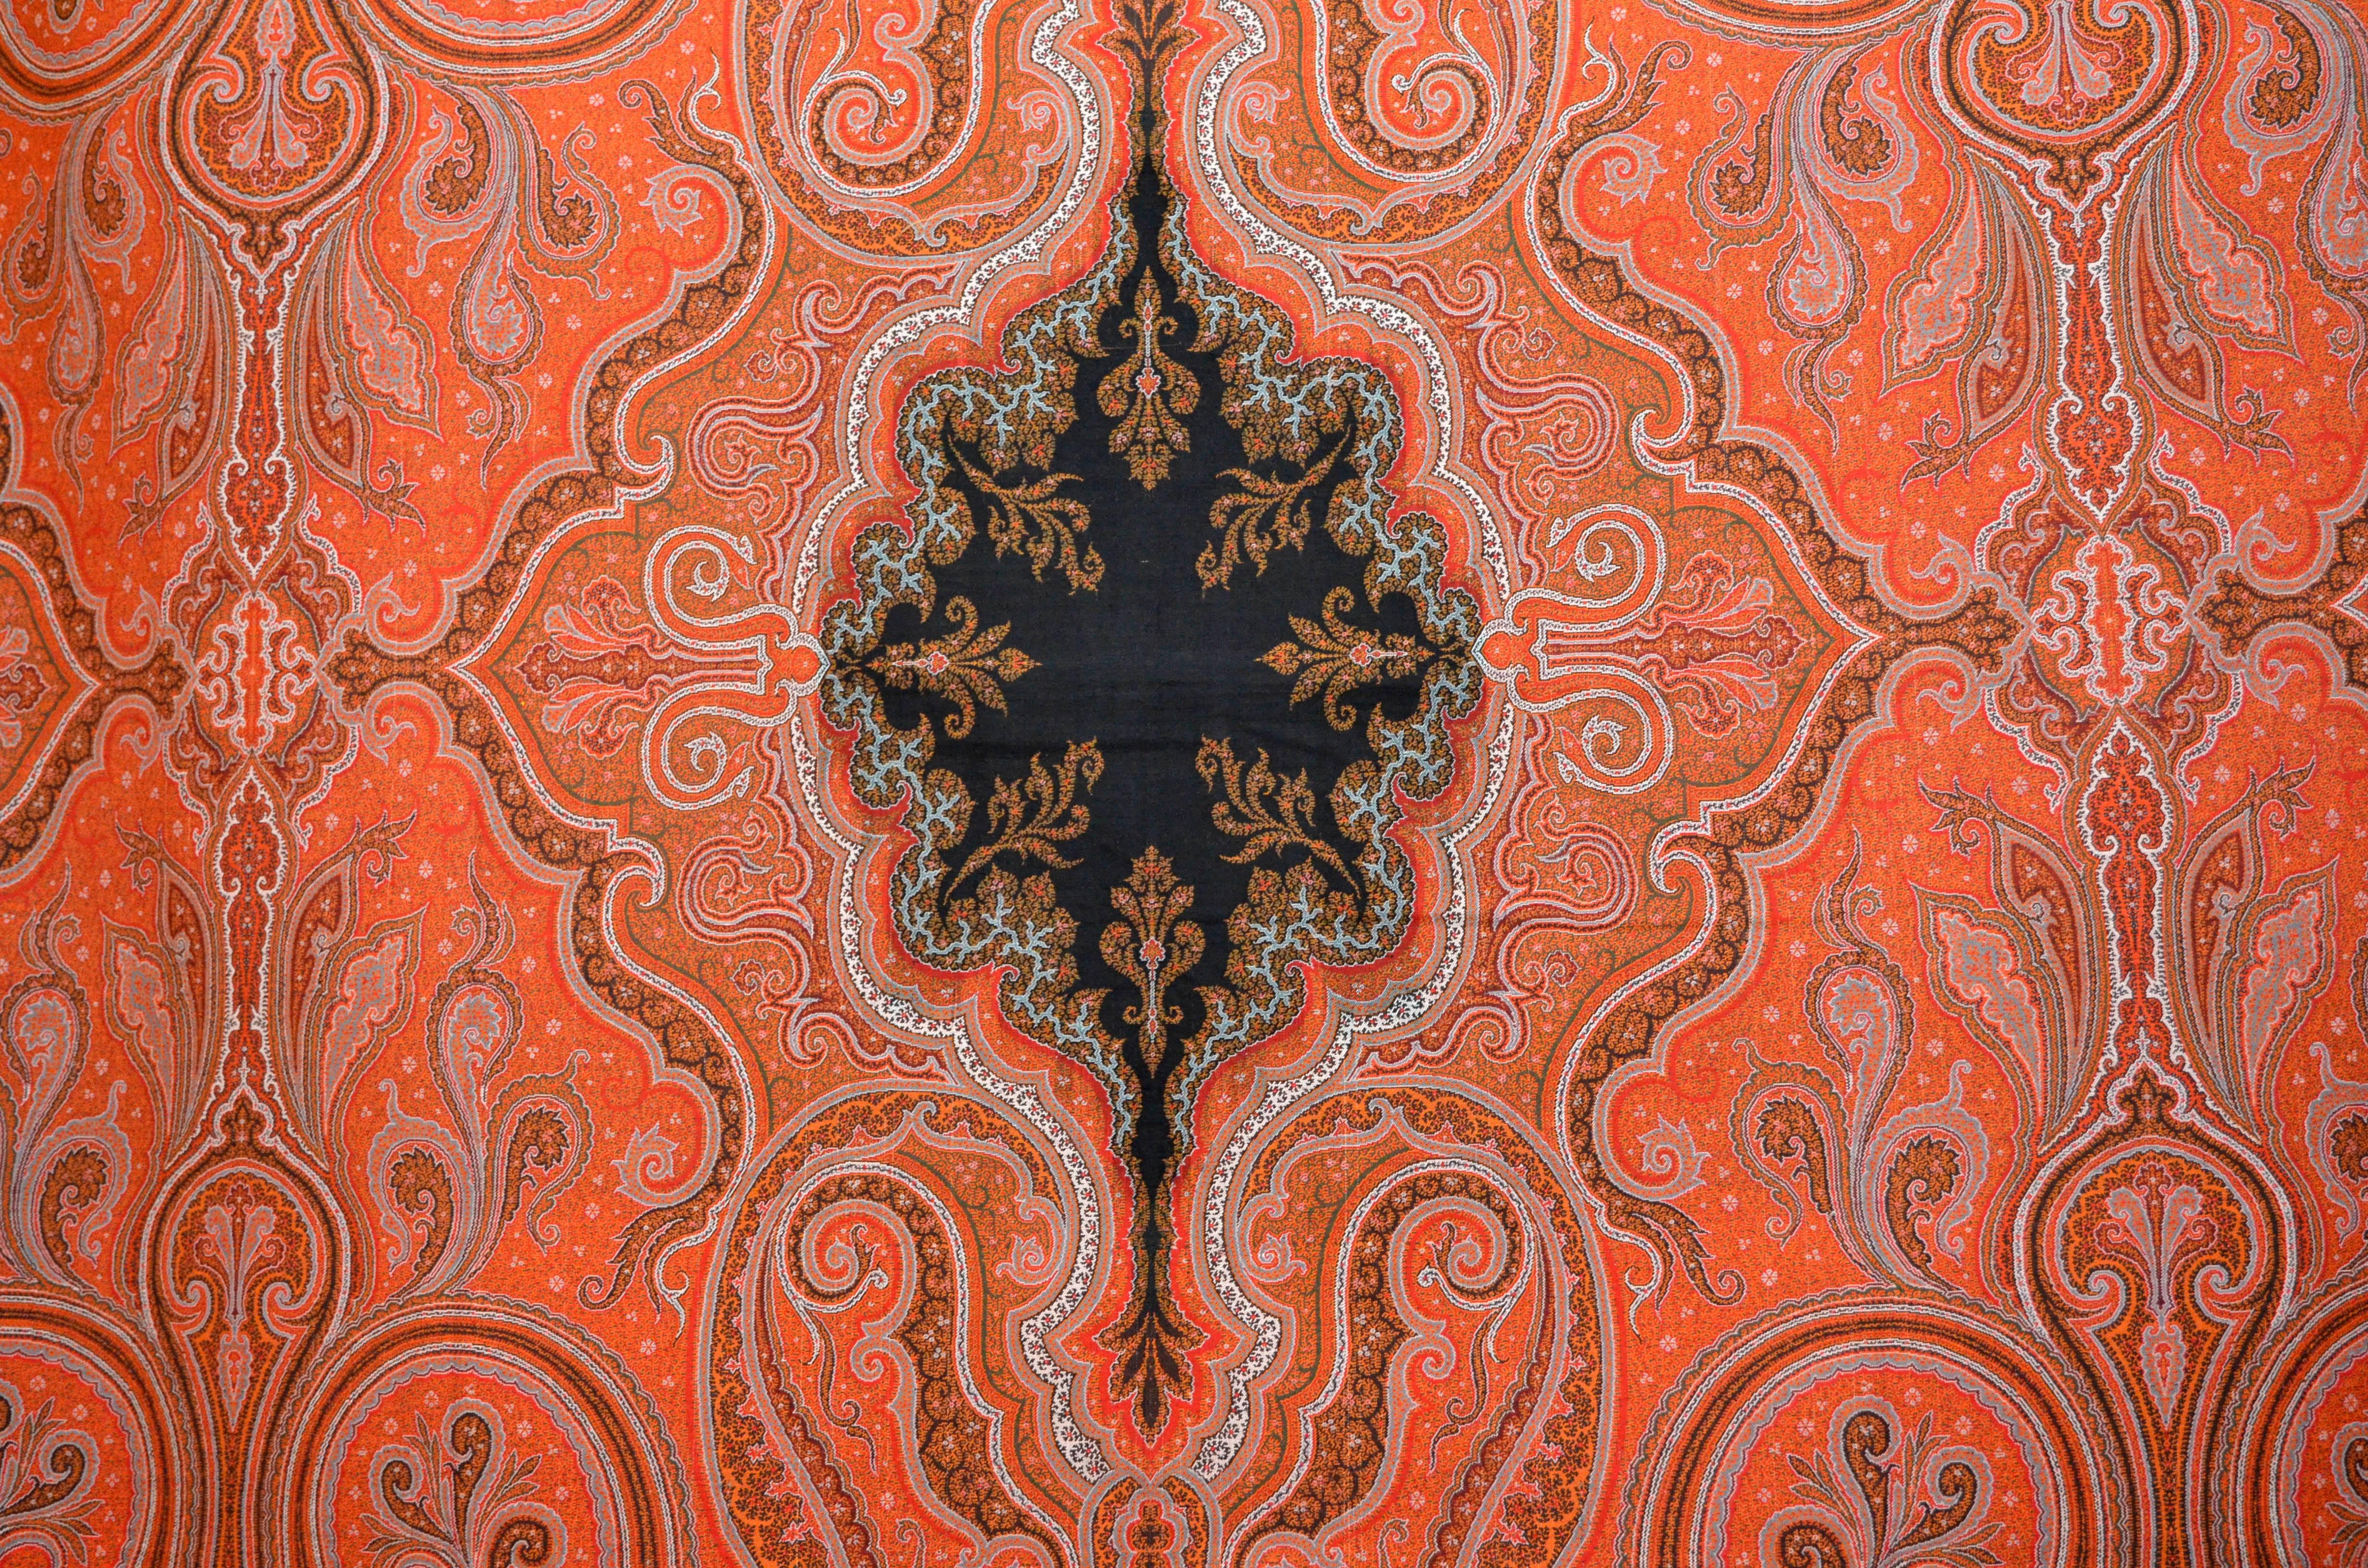 Kashmir Paisley shawl, realized in France, circa 1870. Size 11.2 ft x 5.2 ft - cm. : 342 x 157.
Handwoven in wool, natural dying colors, with Jacquard hand loom.
Black silk and wool central reserve. Very rare light blue coral pattern. Head